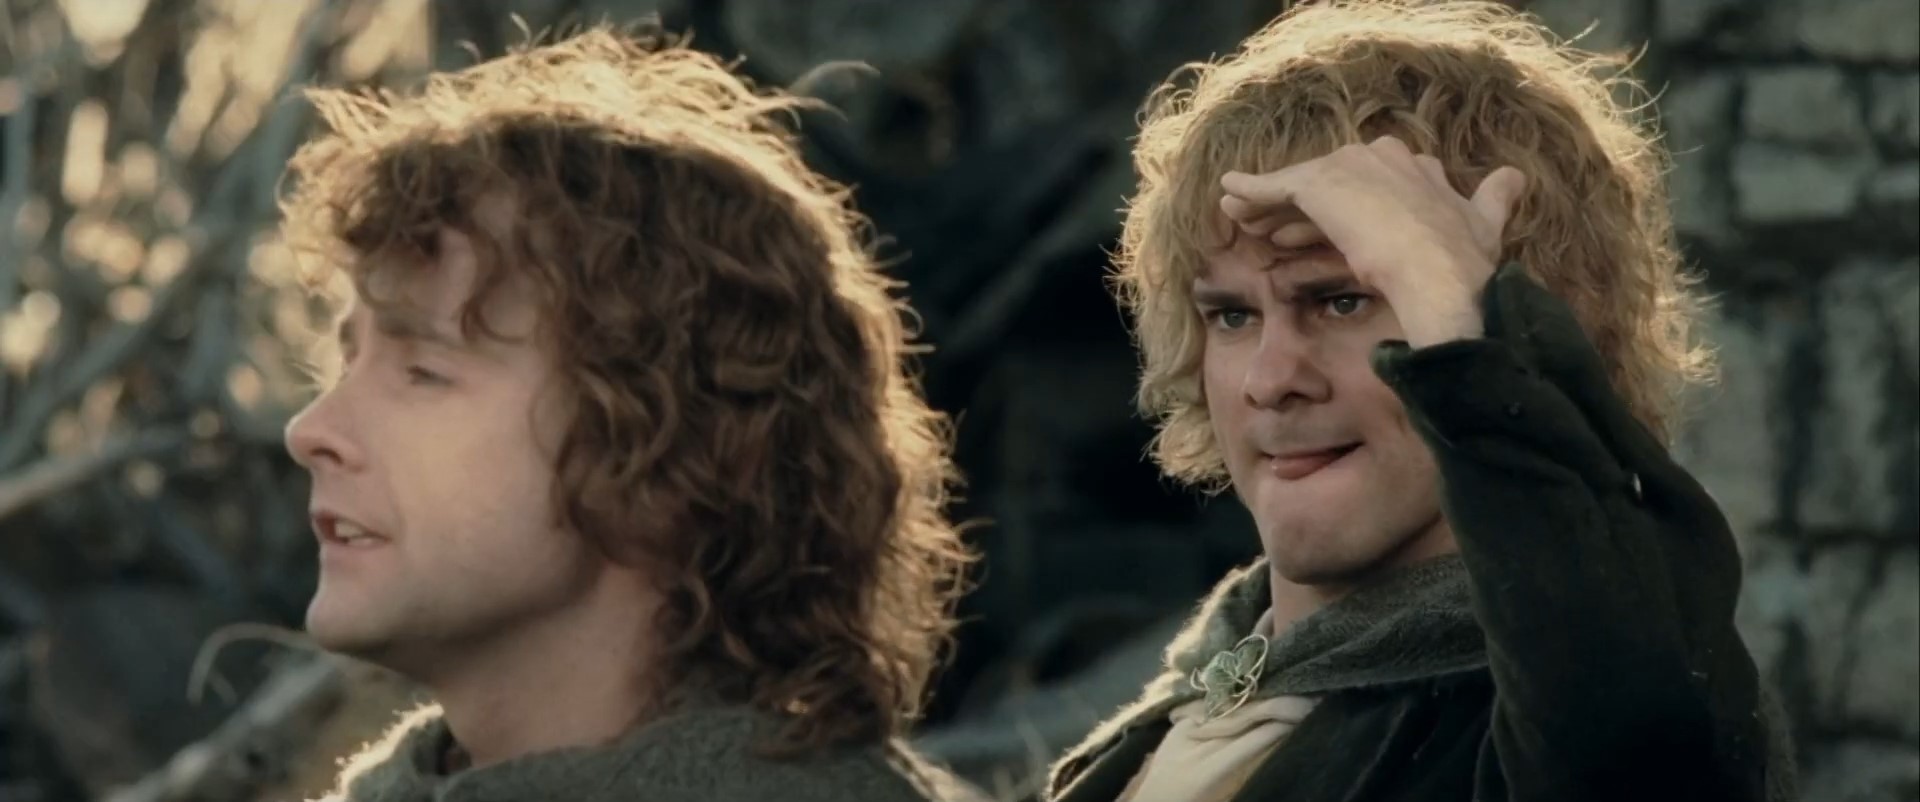 Images of Peregrin Took - Lord of the Rings Wiki